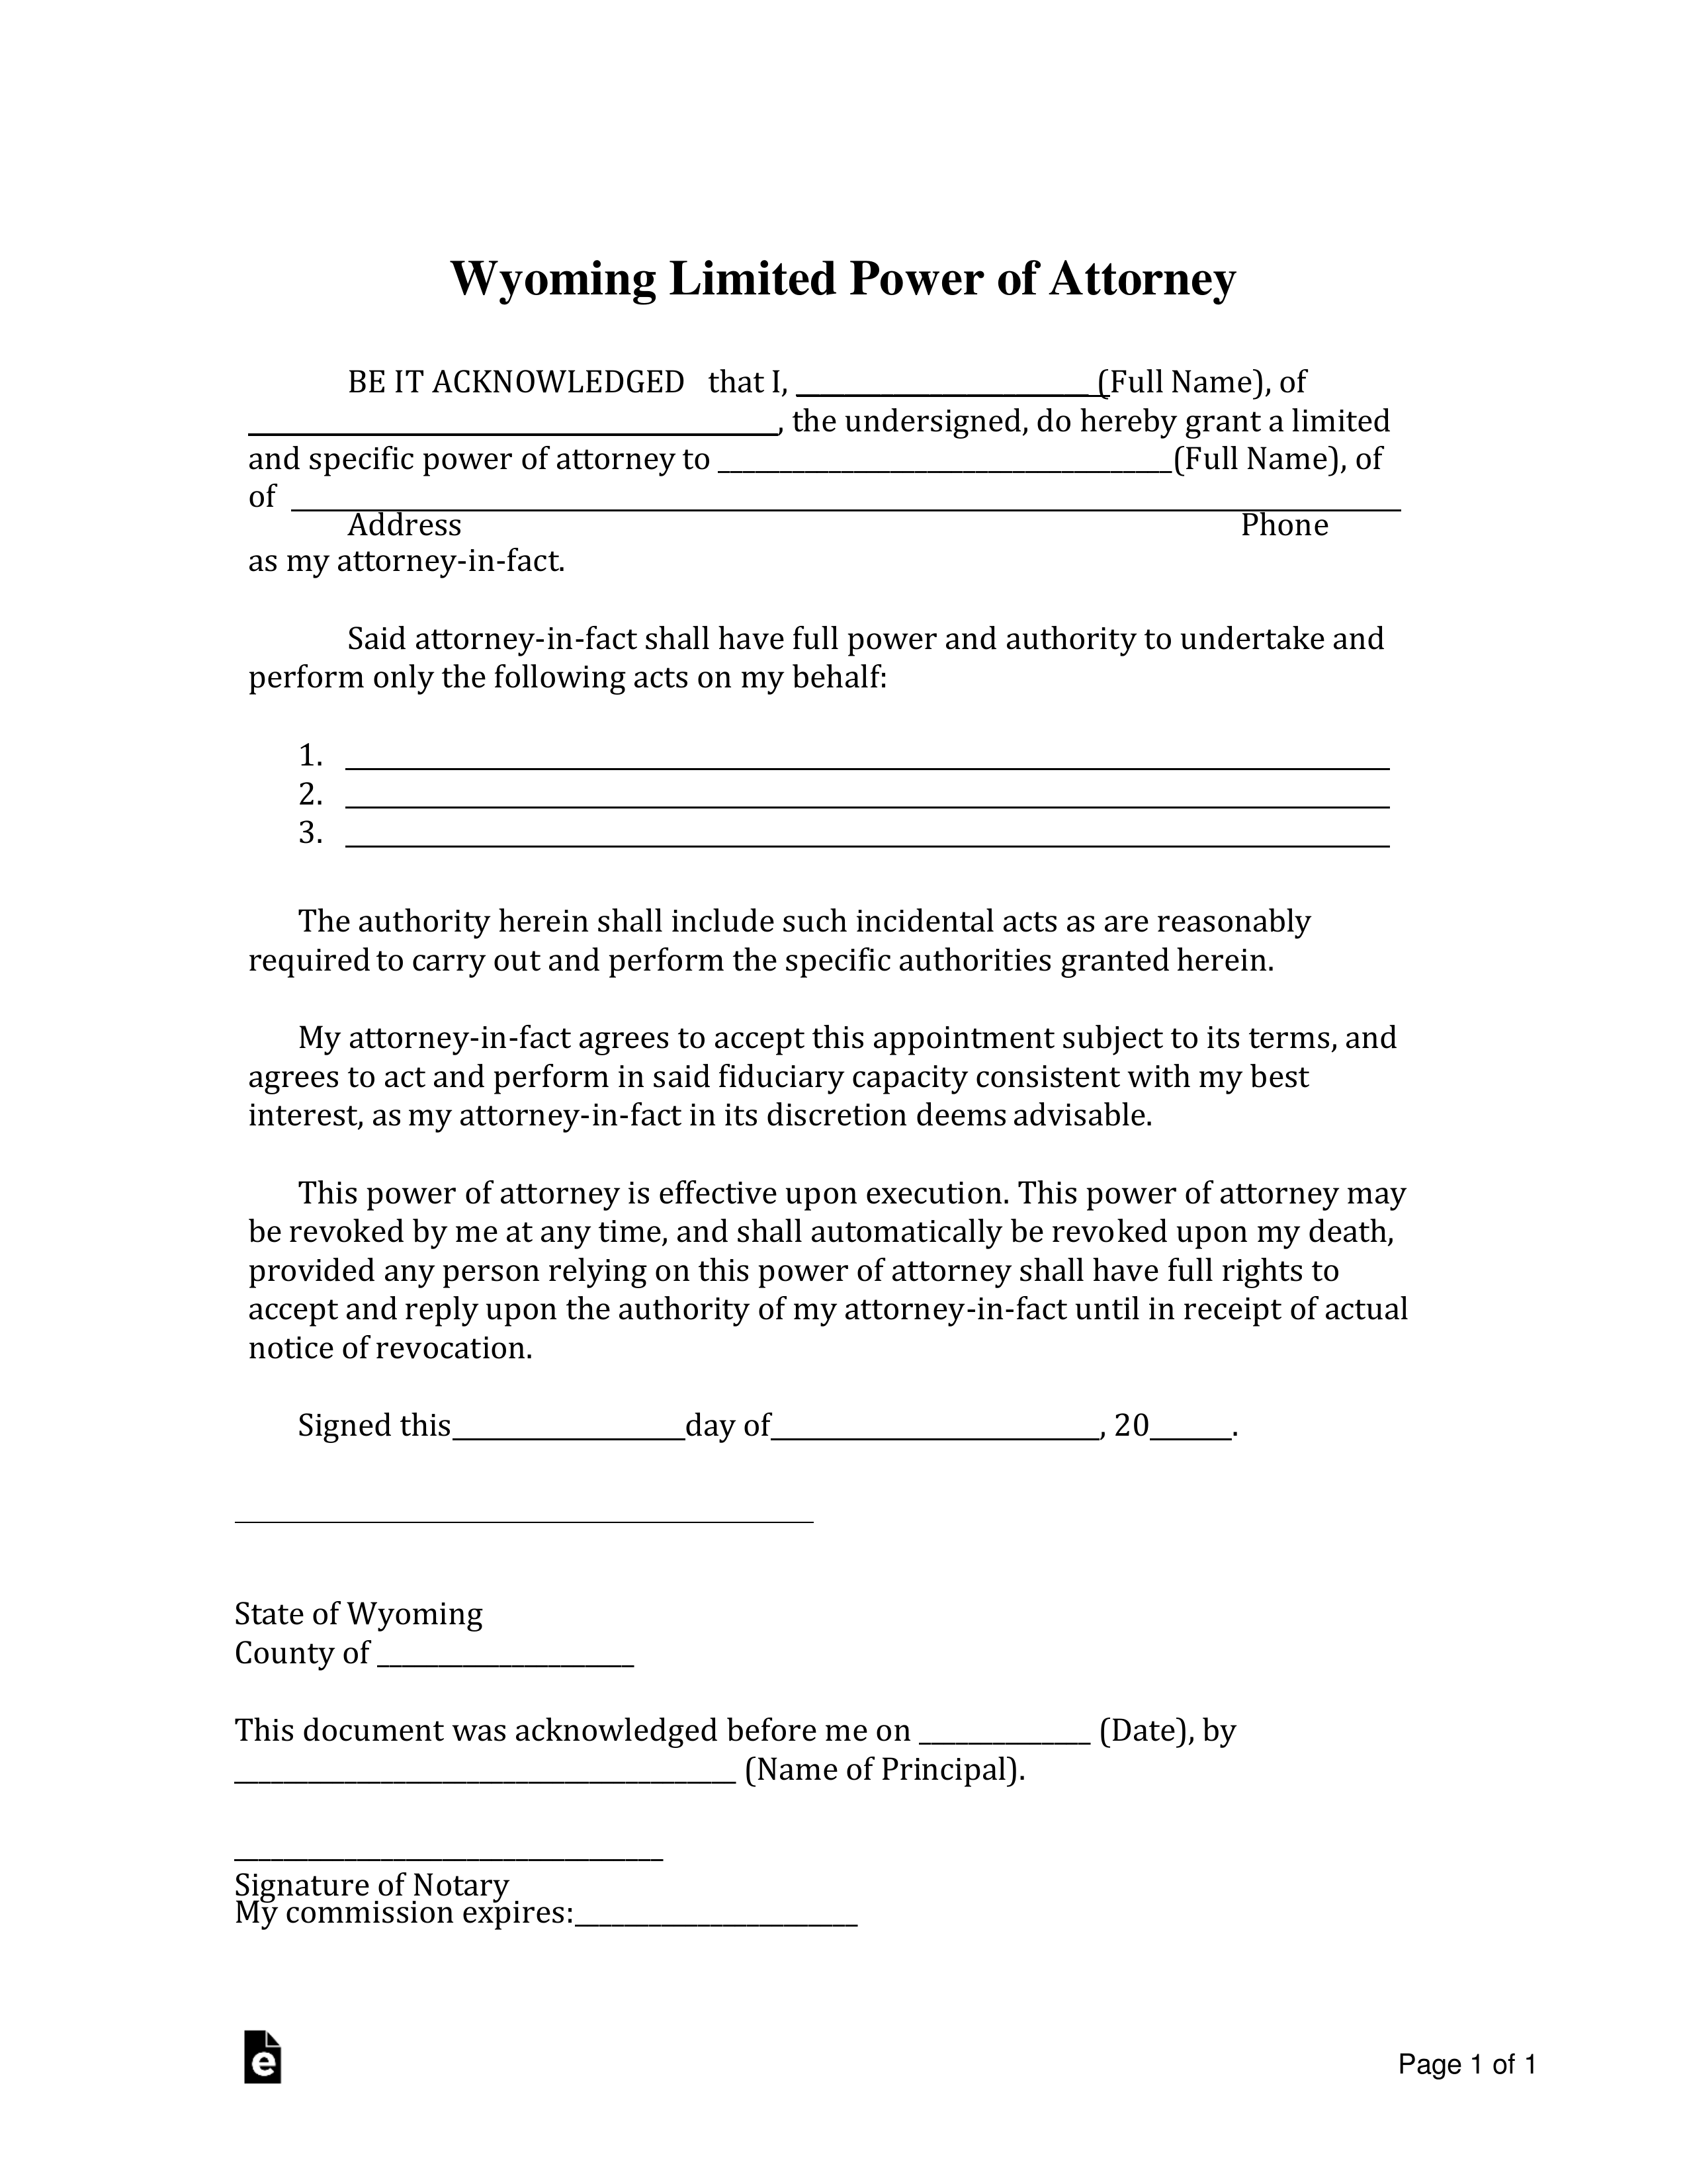 Wyoming Limited Power of Attorney